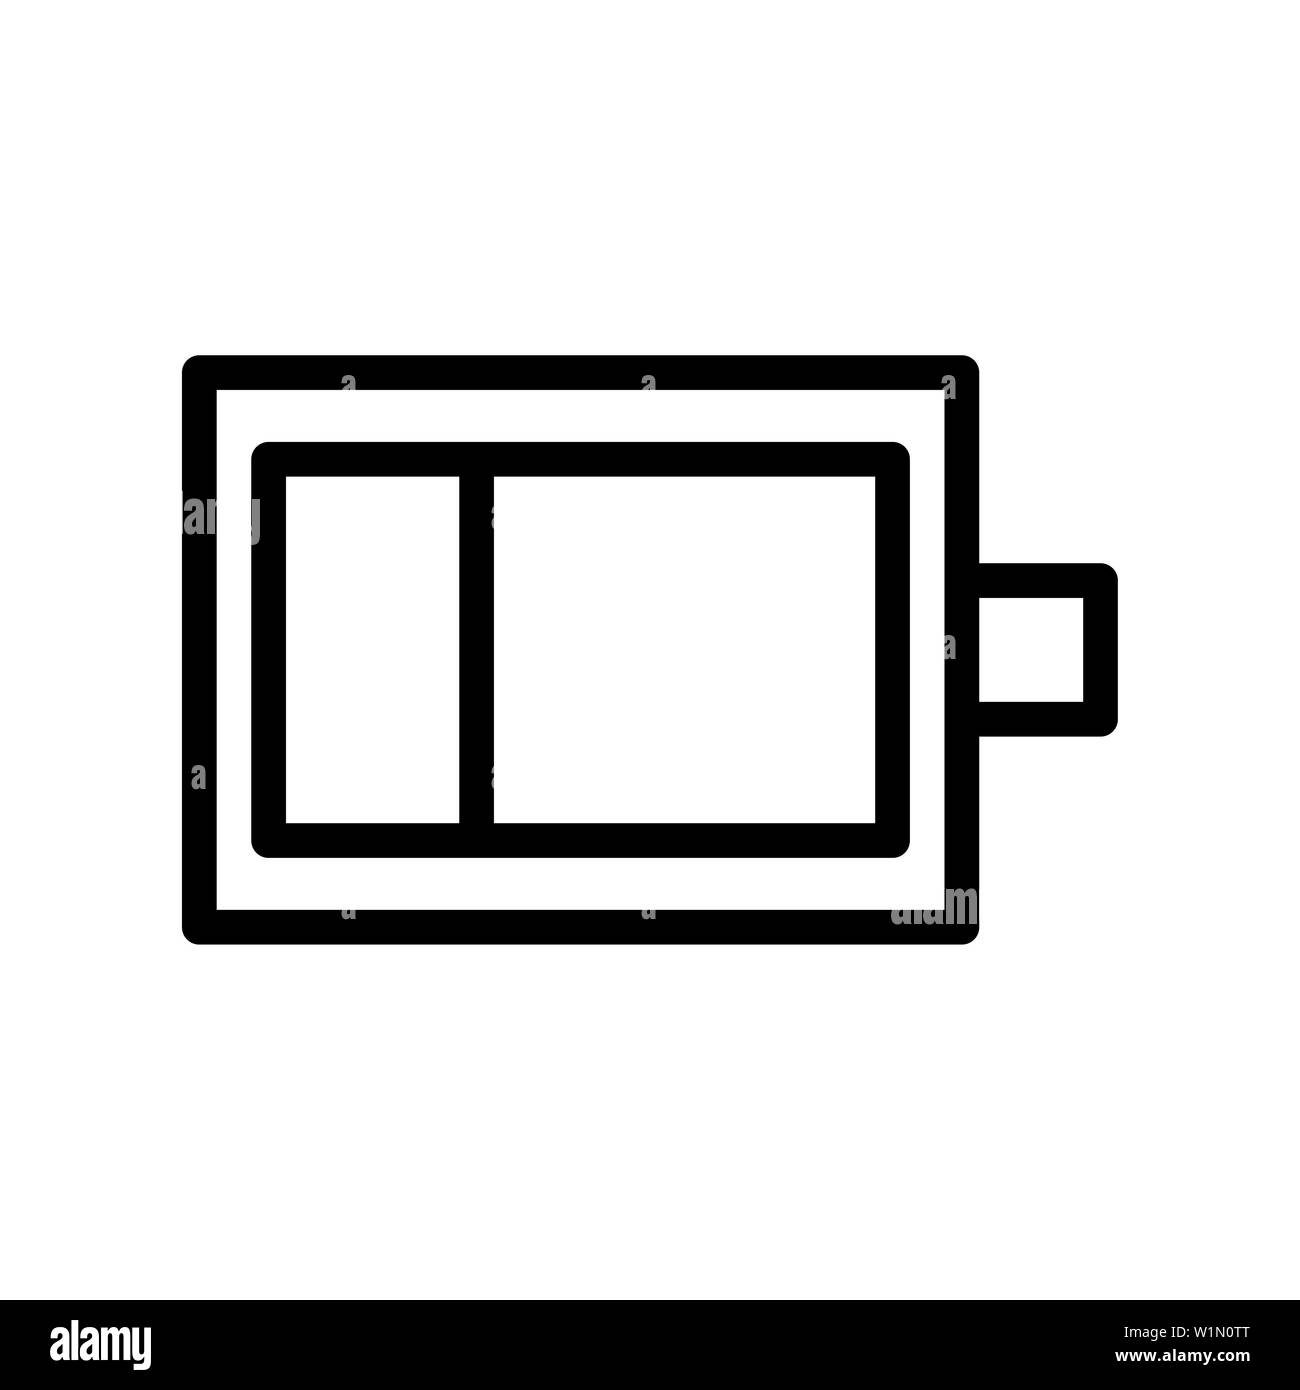 battery icon. flat illustration of battery vector icon for website,  pattern, design, logo, etc Stock Photo - Alamy